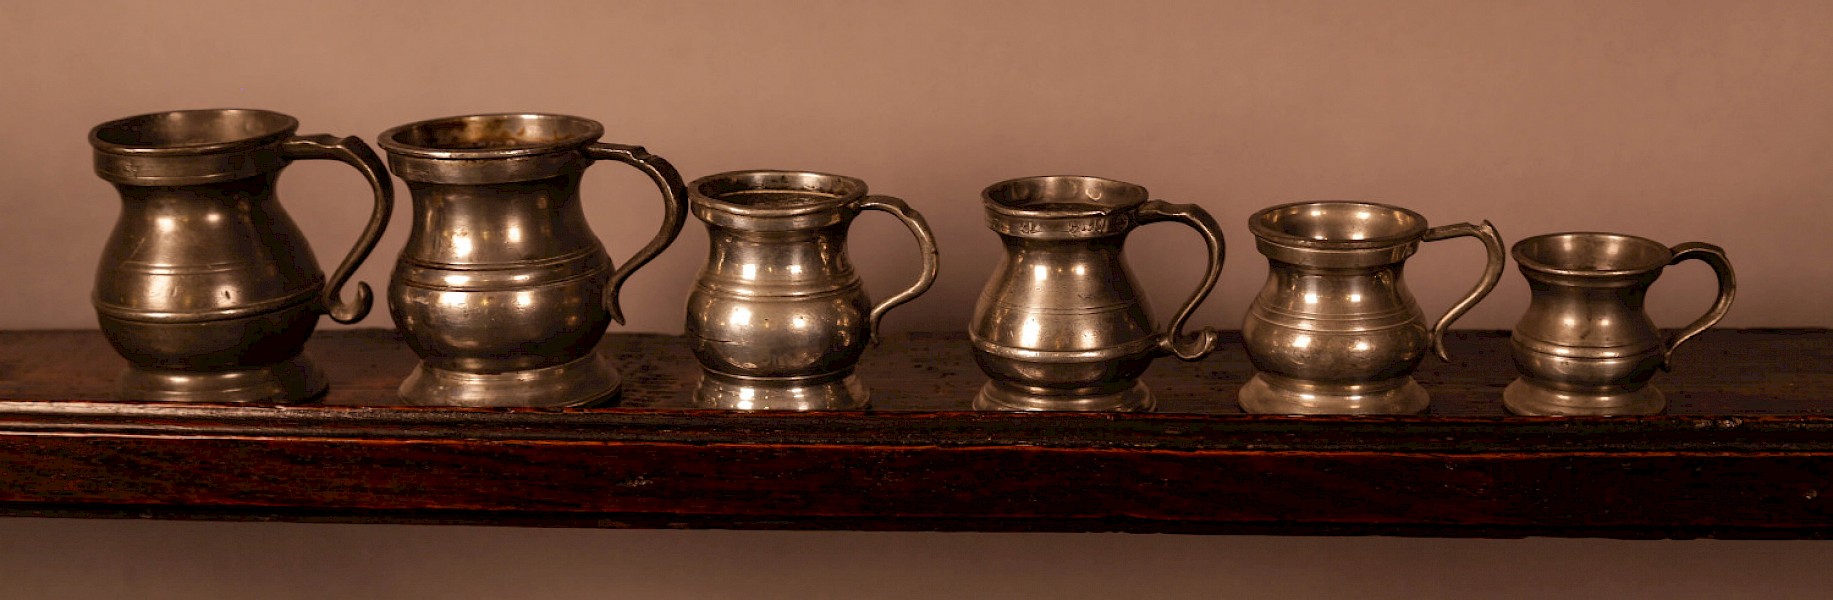 A collection of 6 pewter tankards antique